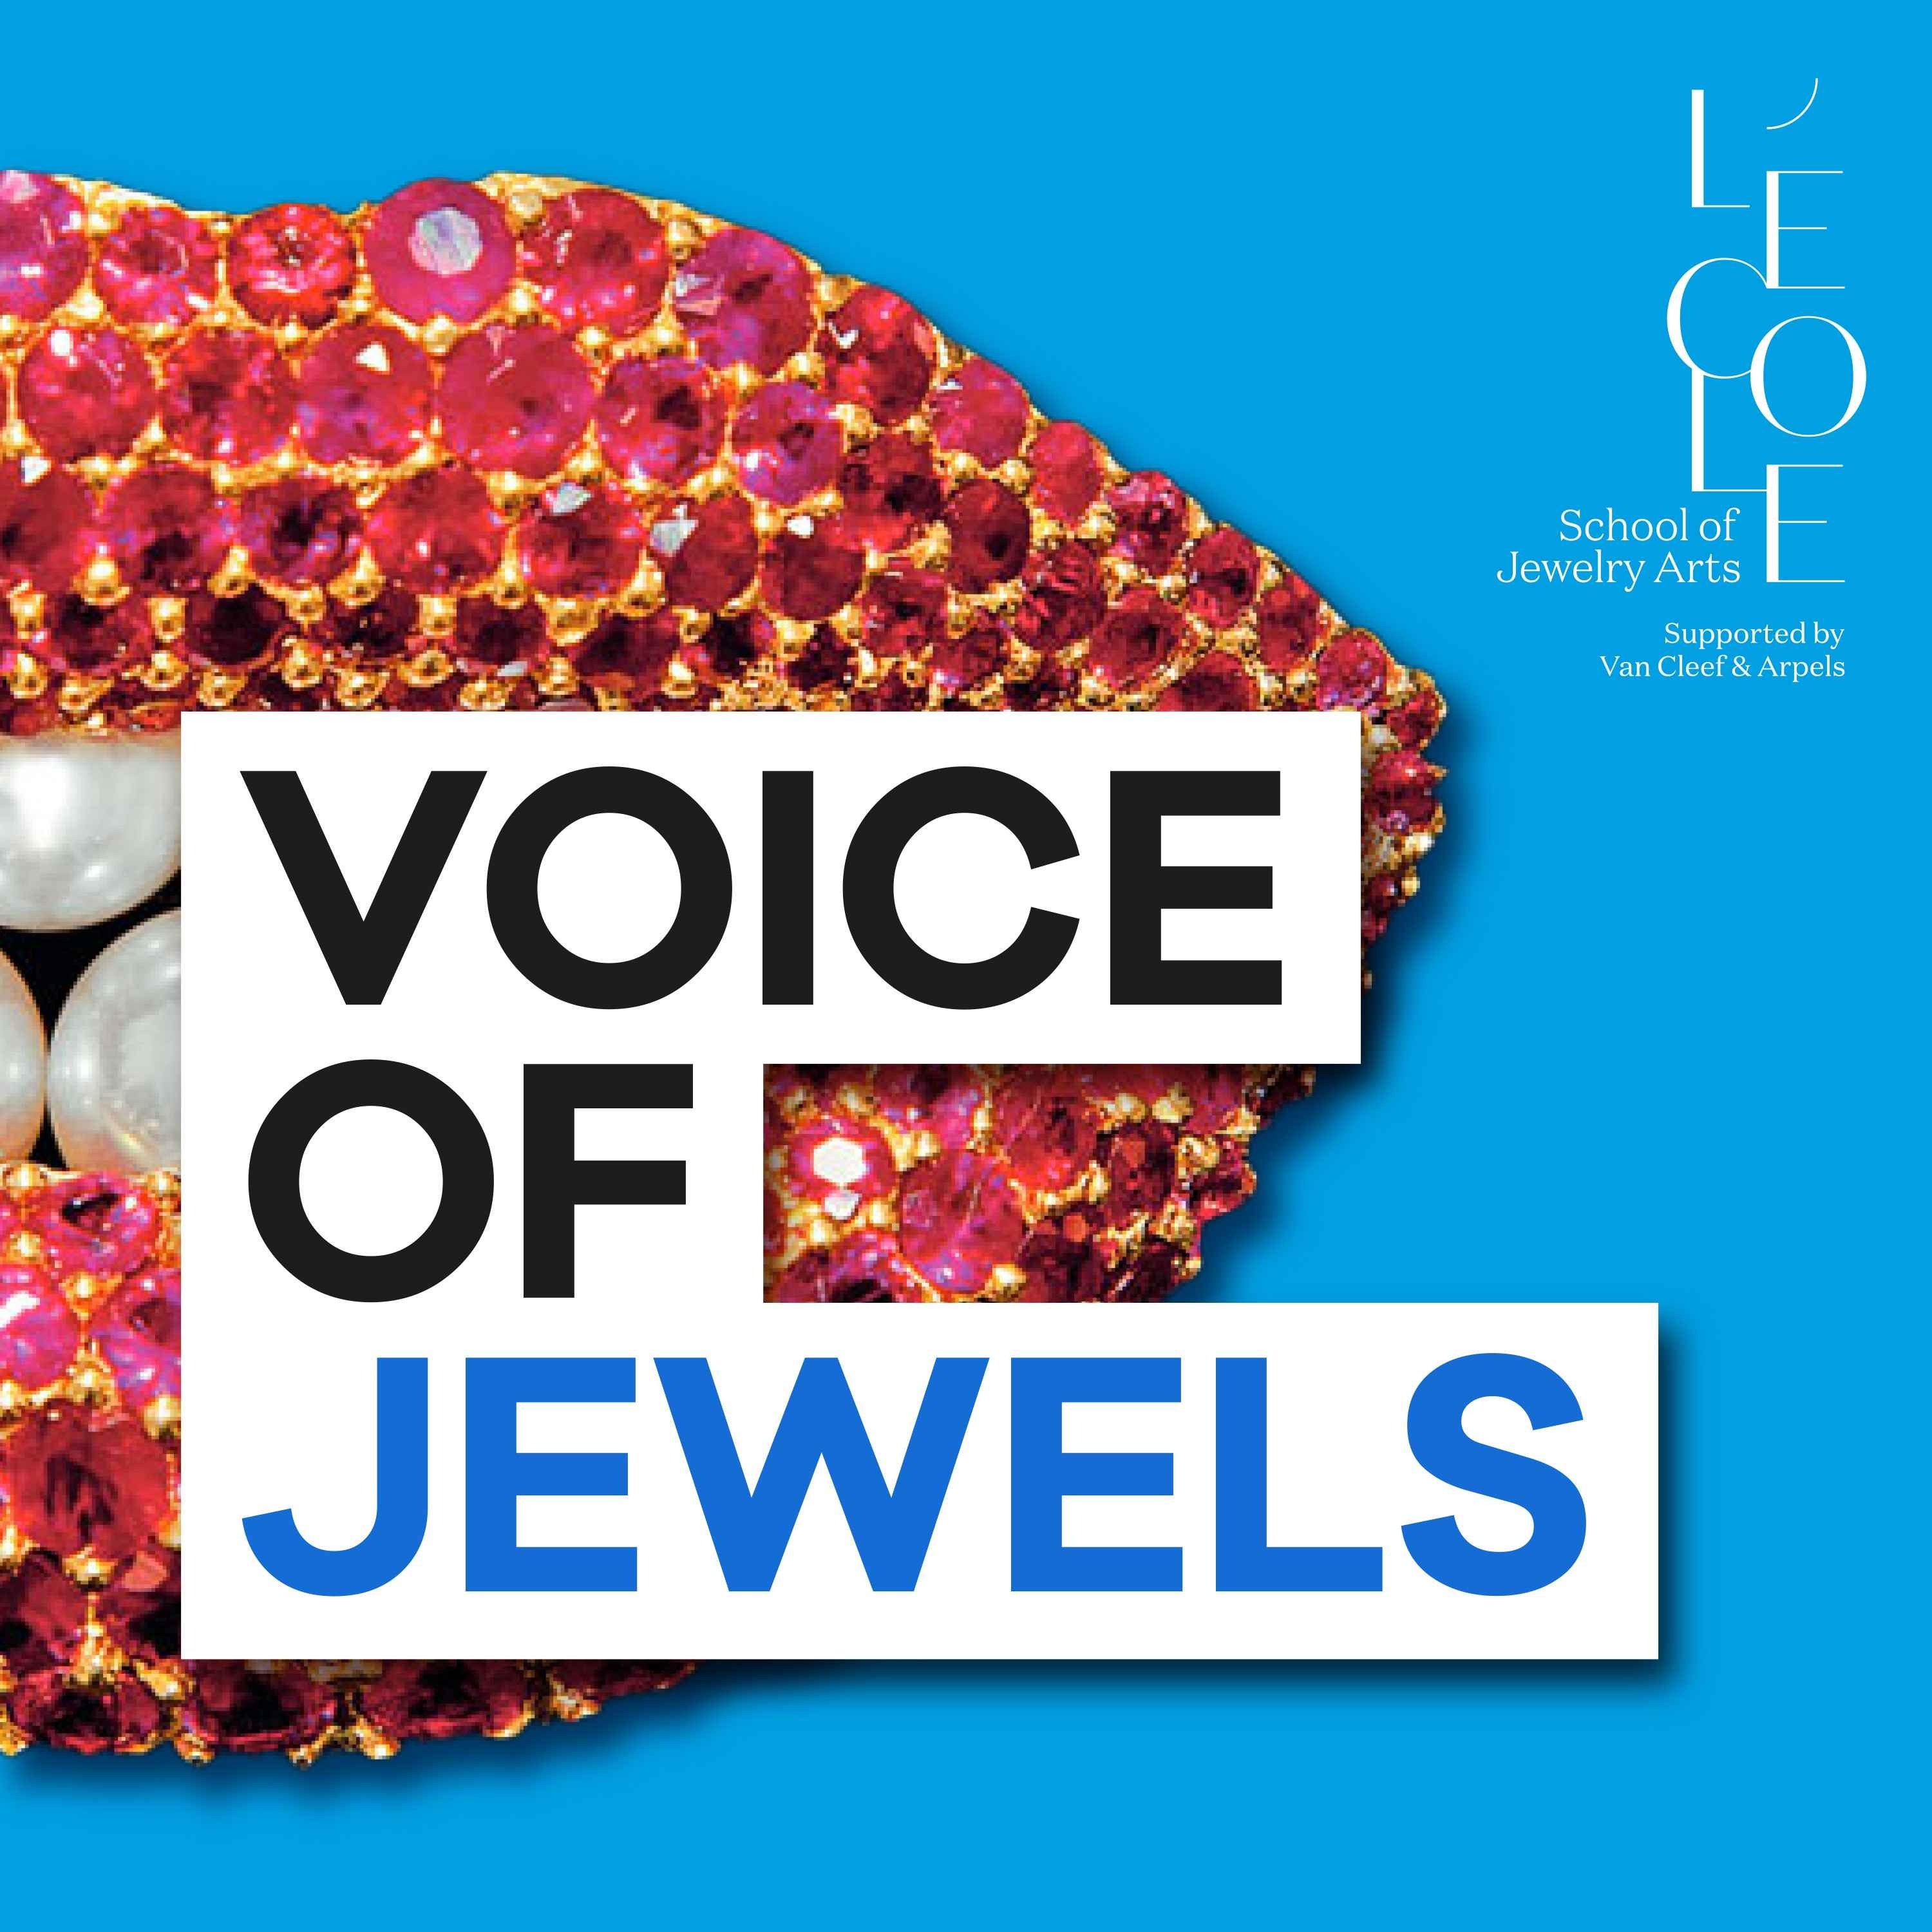 cover art for Discover Voice of Jewels, a podcast from L’ÉCOLE, School of Jewelry Arts  supported by Van Cleef & Arpels.